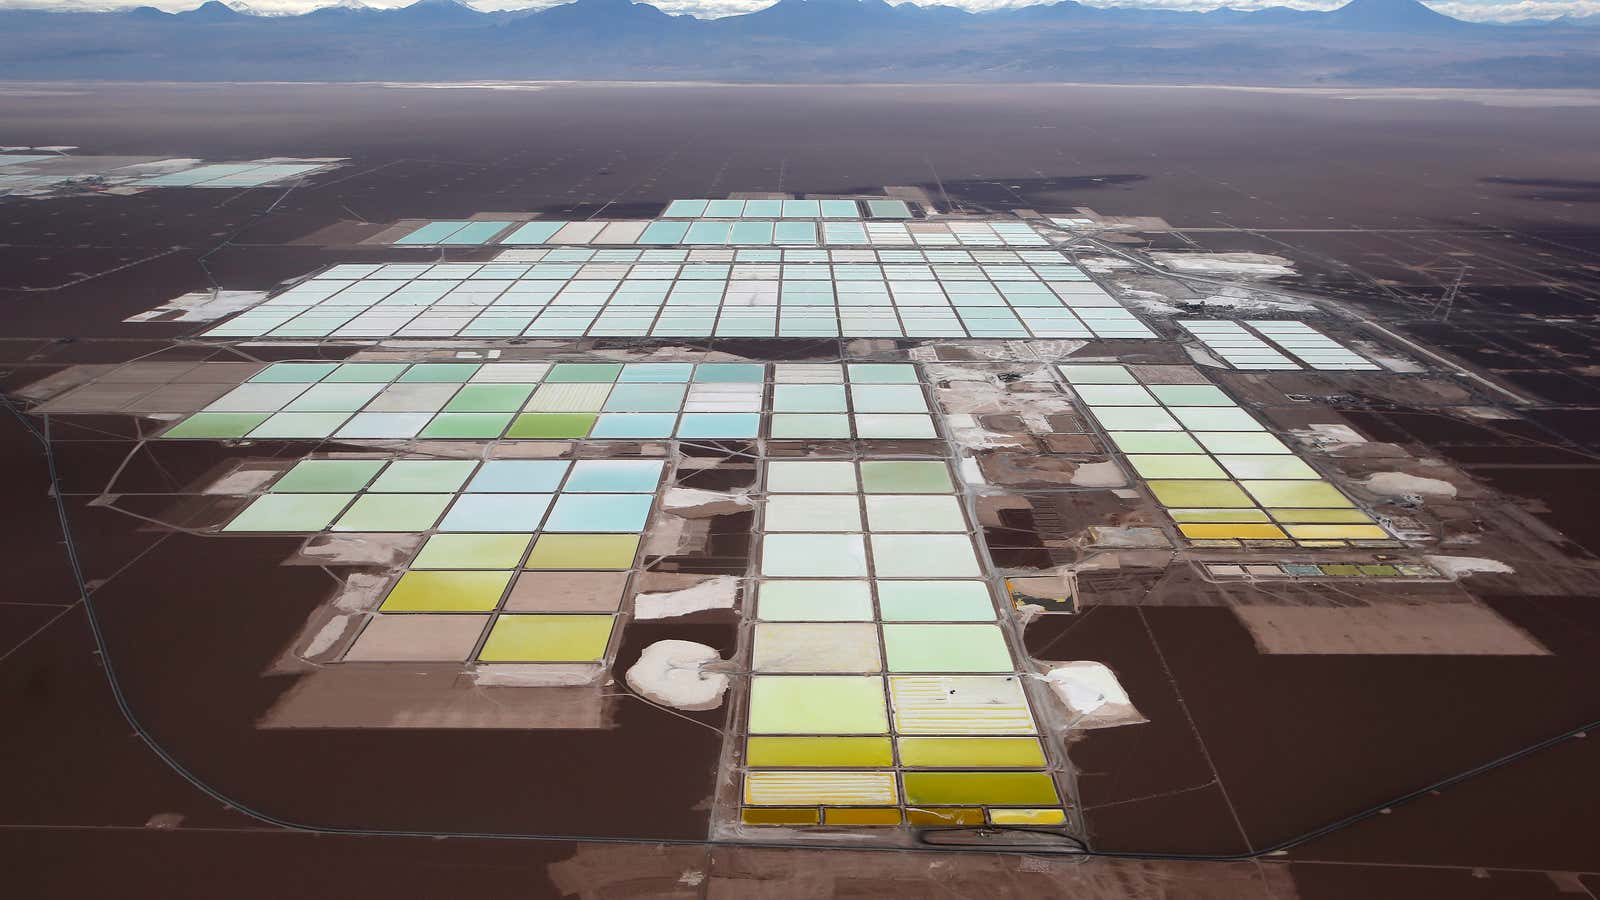 Brine pools and processing areas of the SQM lithium mine on the Atacama salt flat in northern Chile.